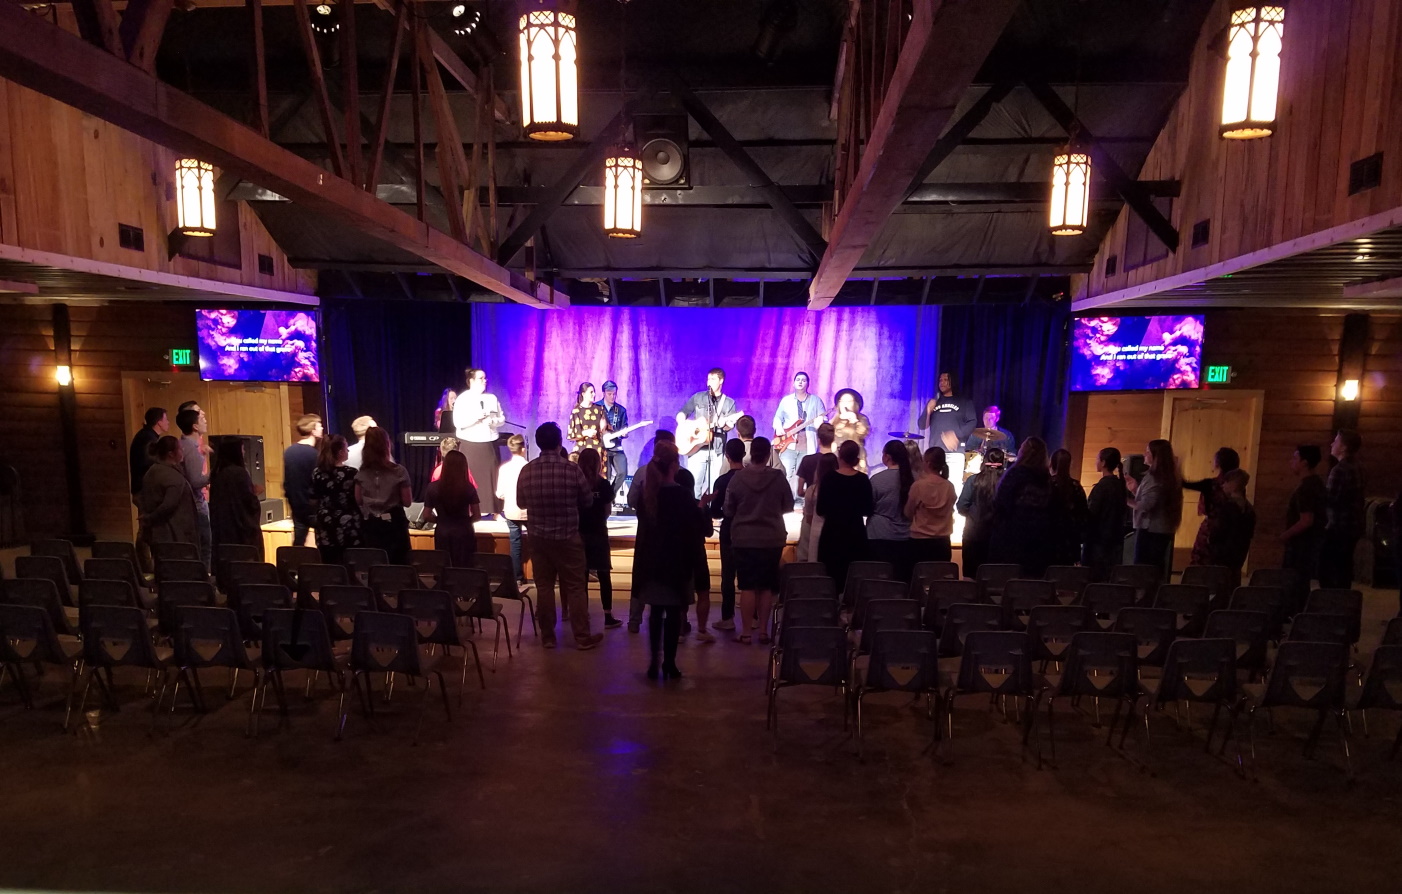 Worship in the Tabernacle